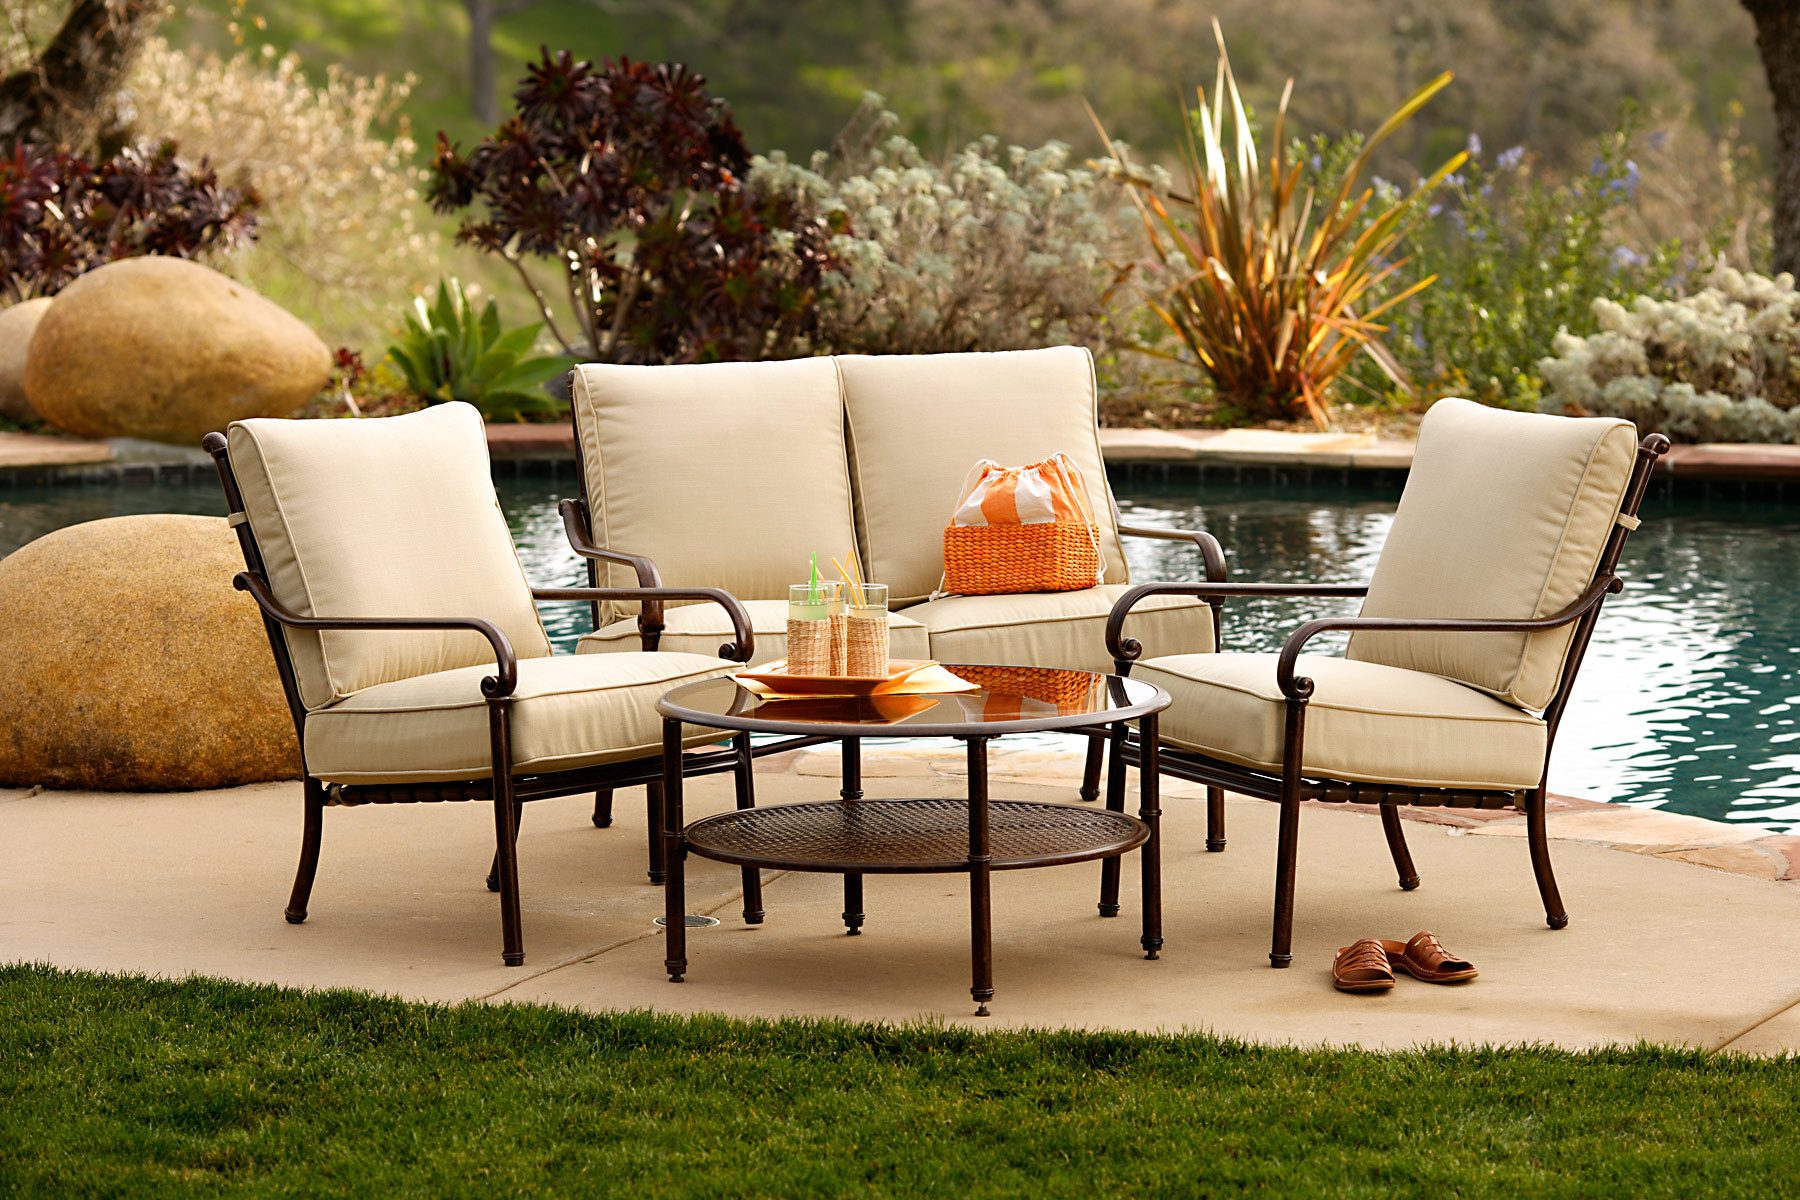 Metal Patio Furniture Sets for Outdoor Small Spaces